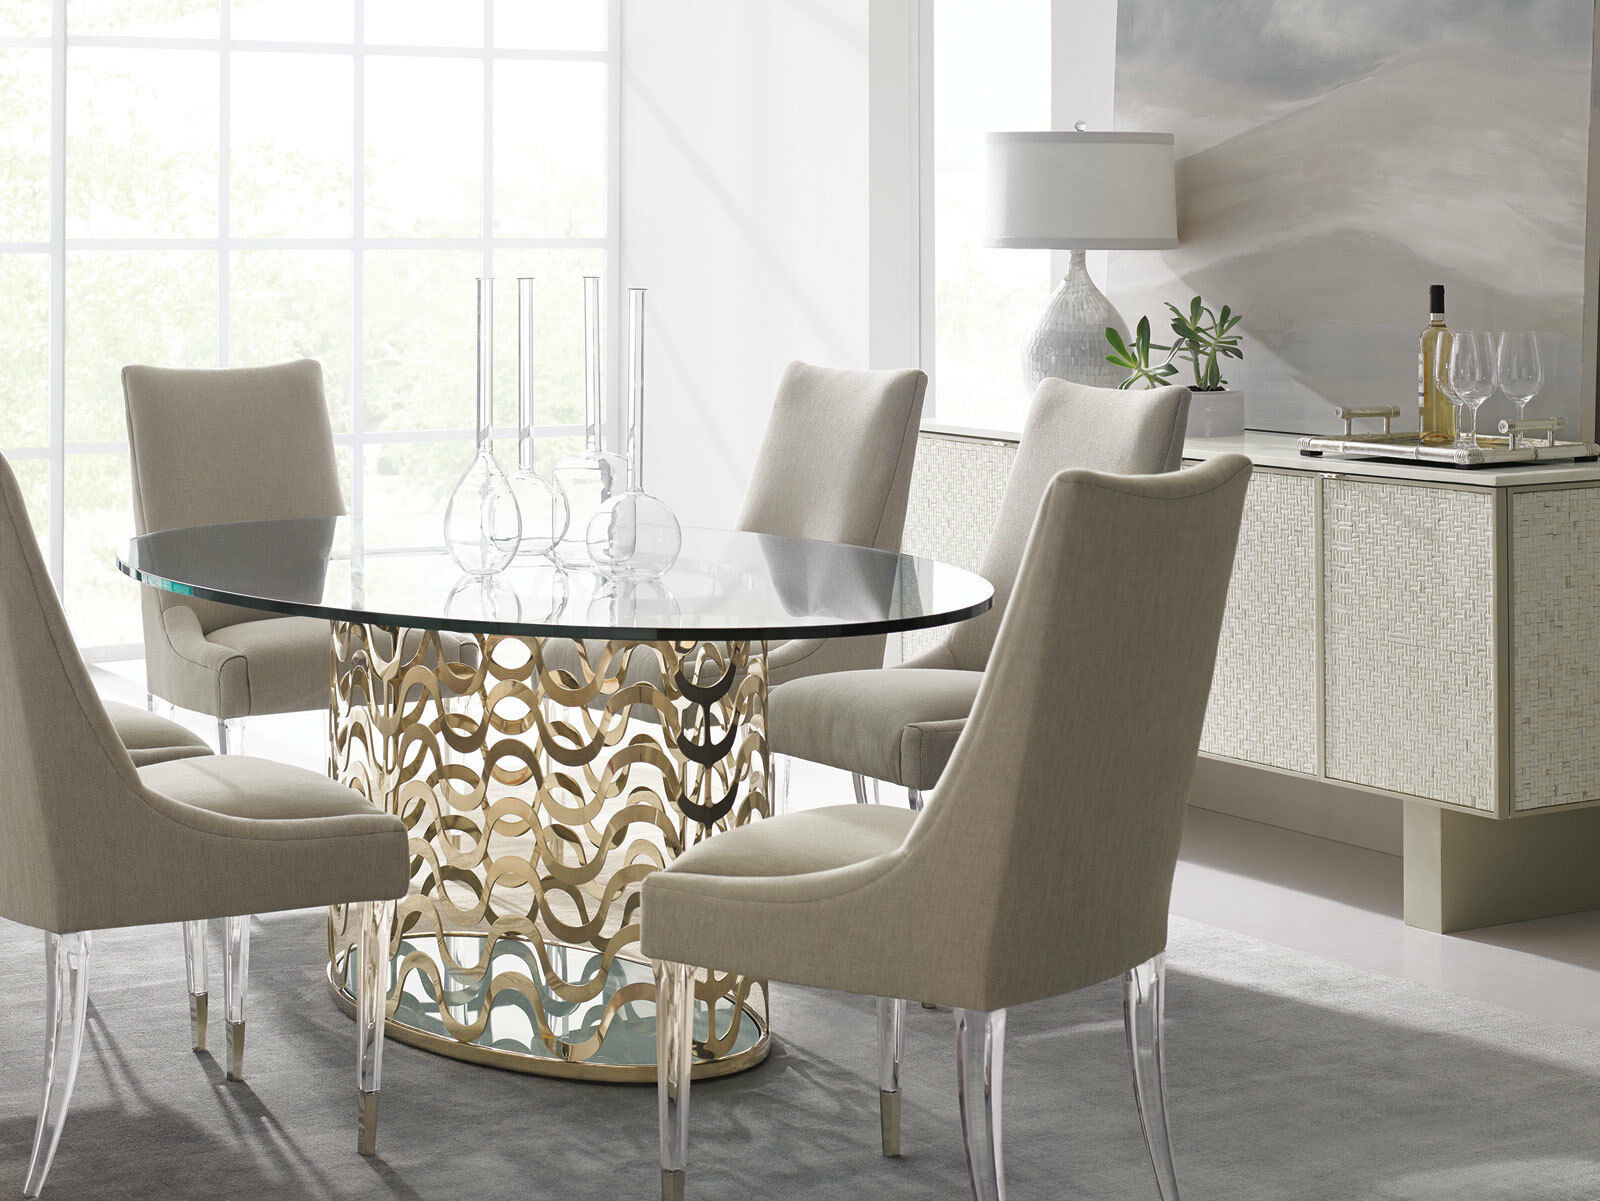 Gold Dining Room Table And Chairs